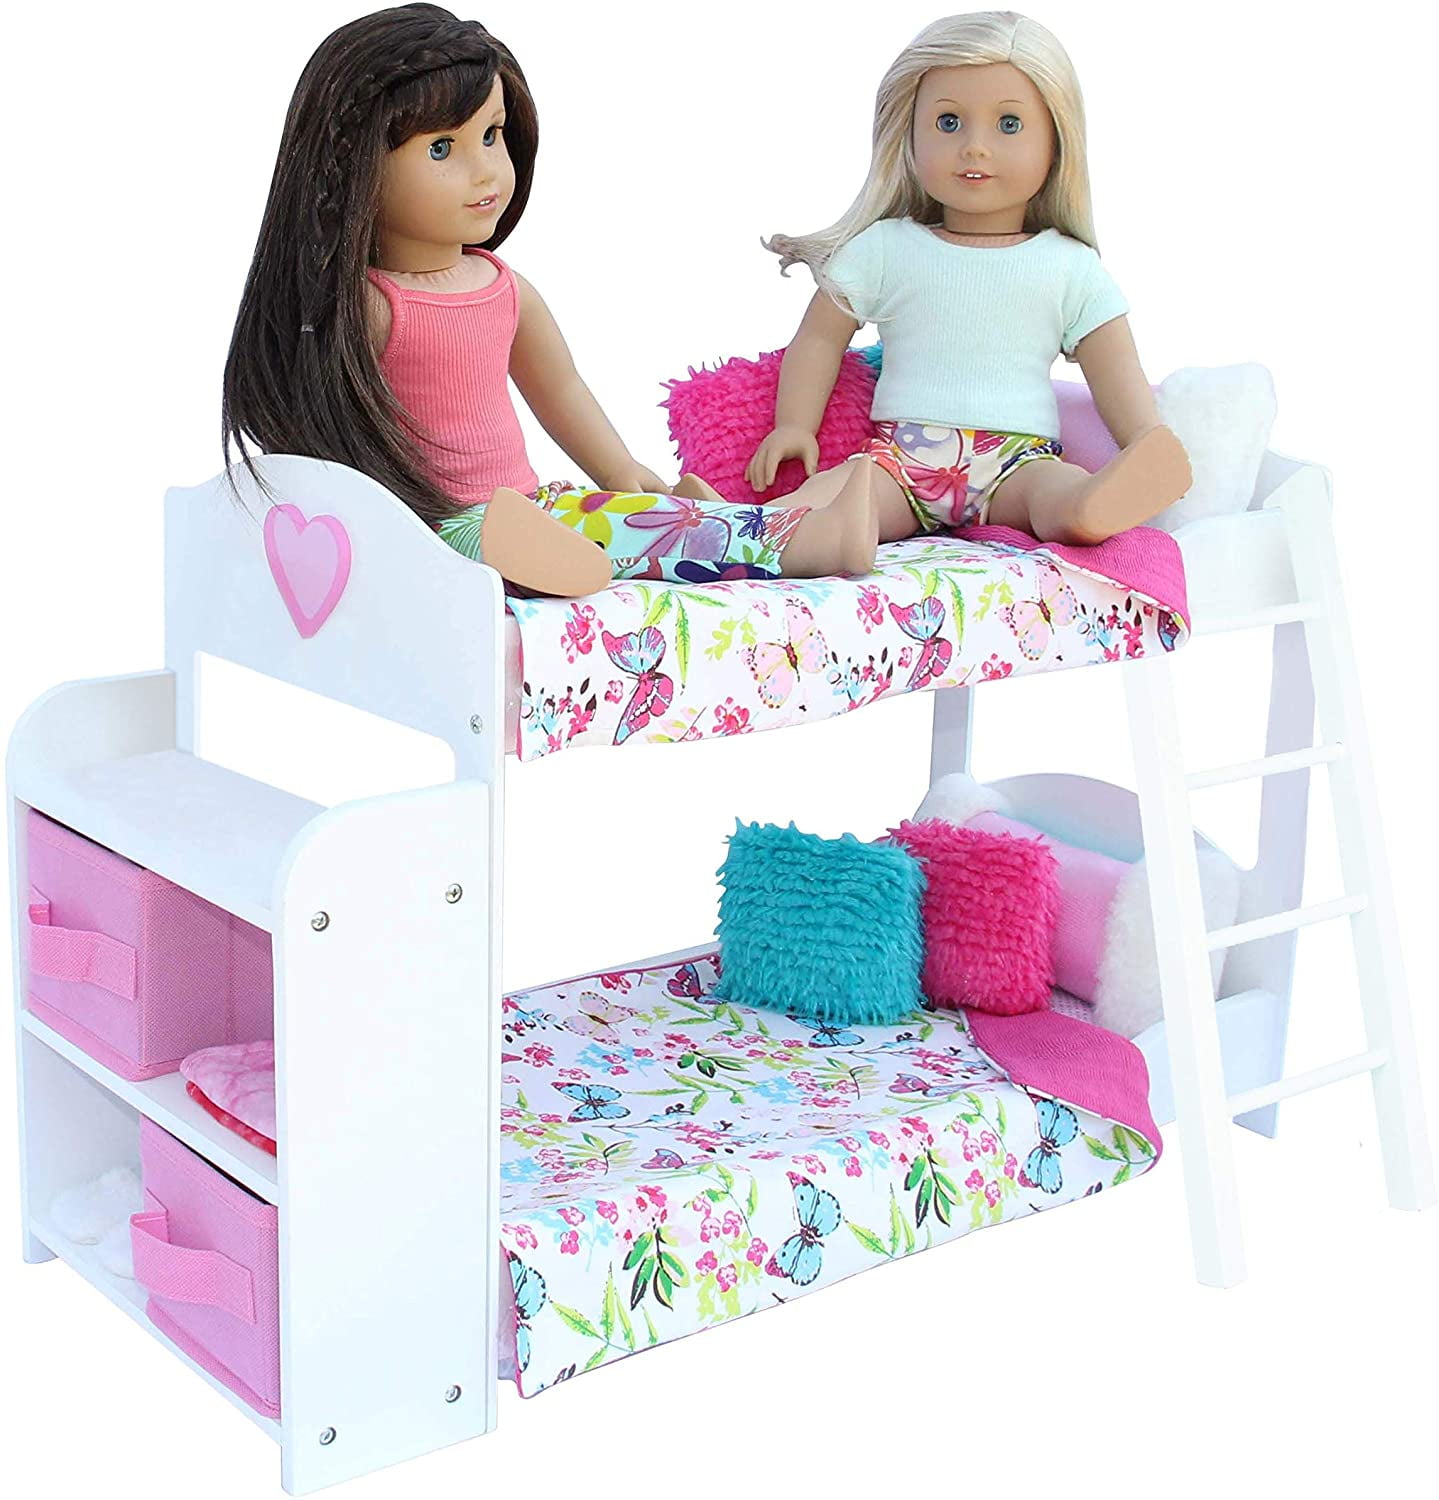 Pzas Toys Doll Bunk Bed, American Girl Bunk Bed With Desk